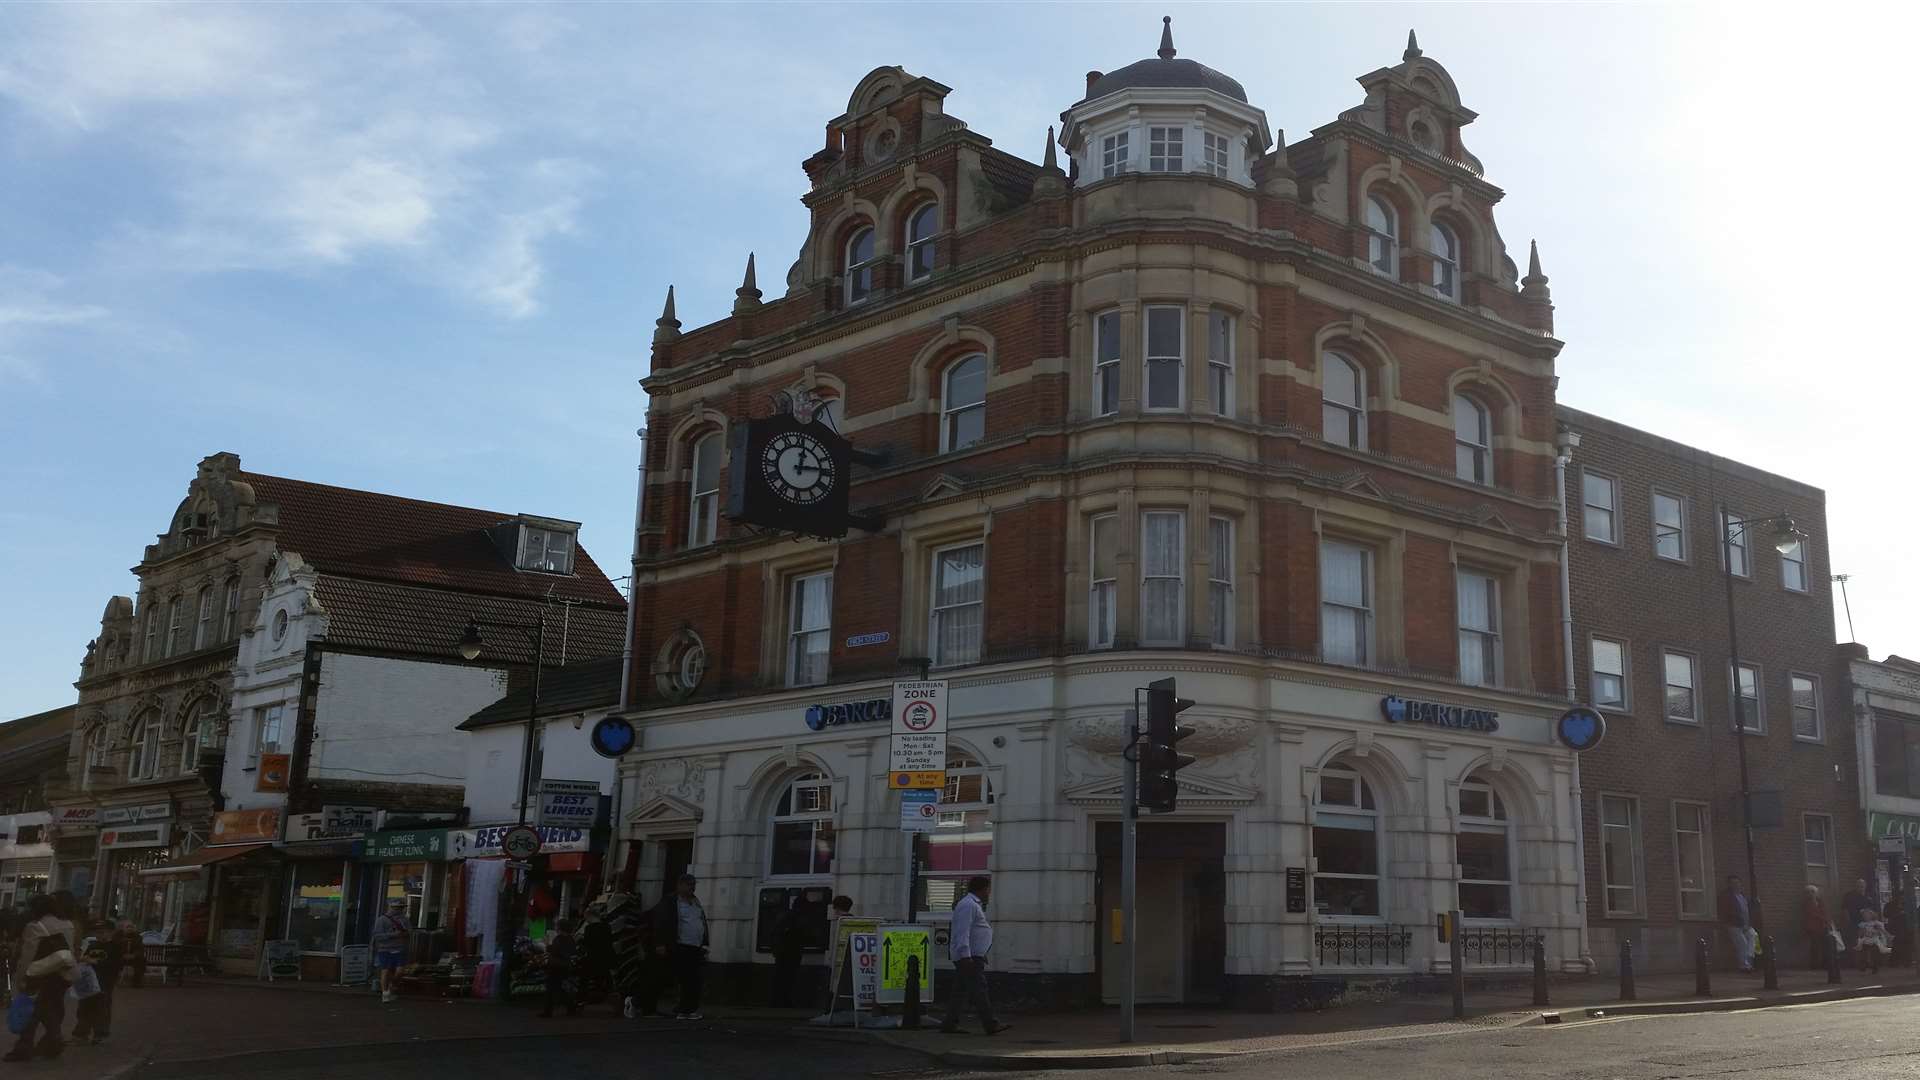 Barclays bank on the corner of Gillingham High Street could become a Coffee Republic